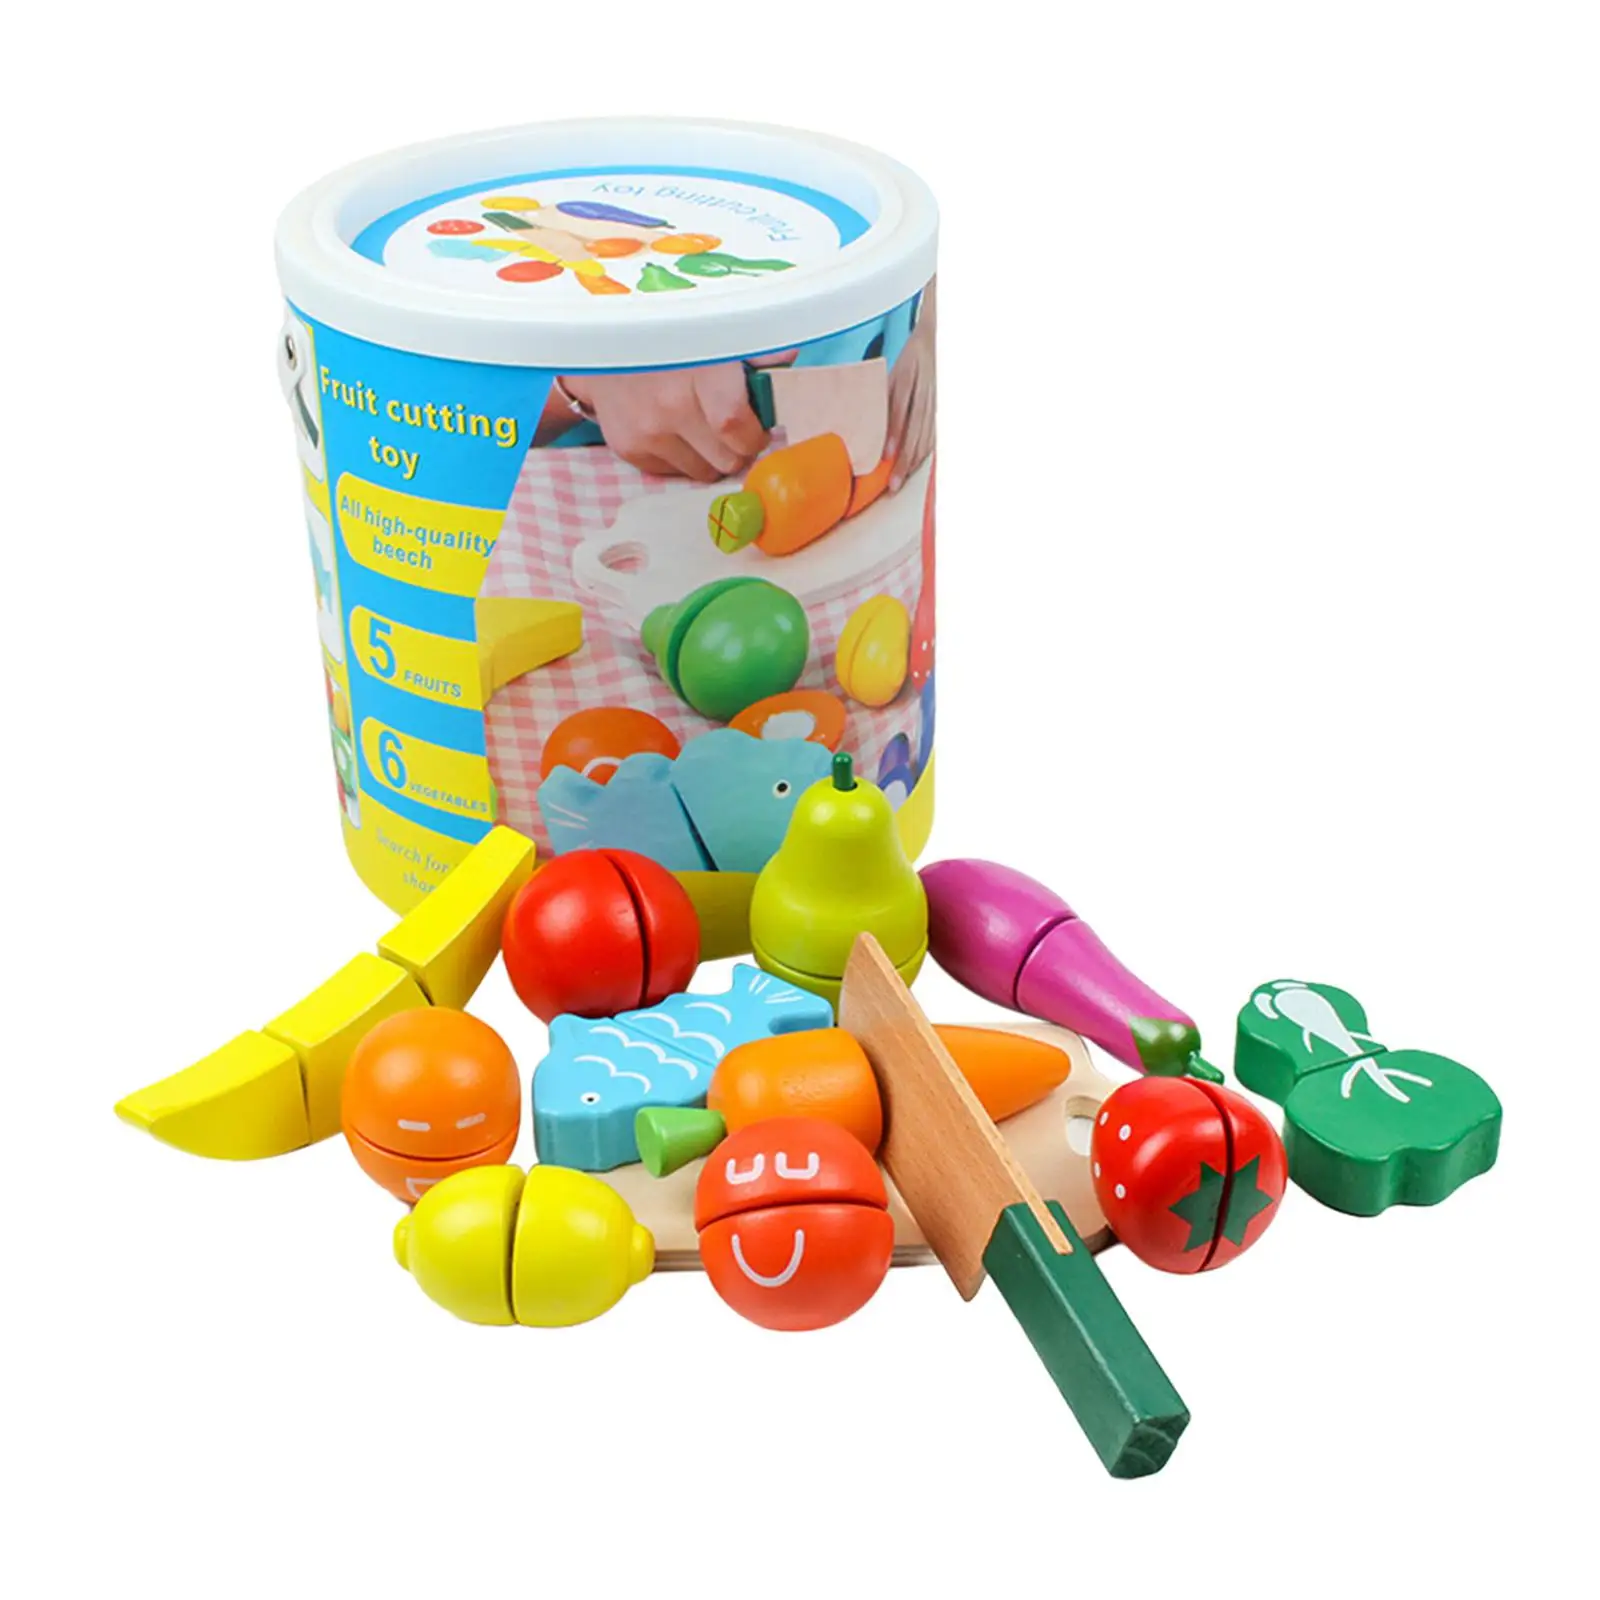 Play Food Toy Pretend Kitchen Toys for Ages 1-3 Years Old Children Gift